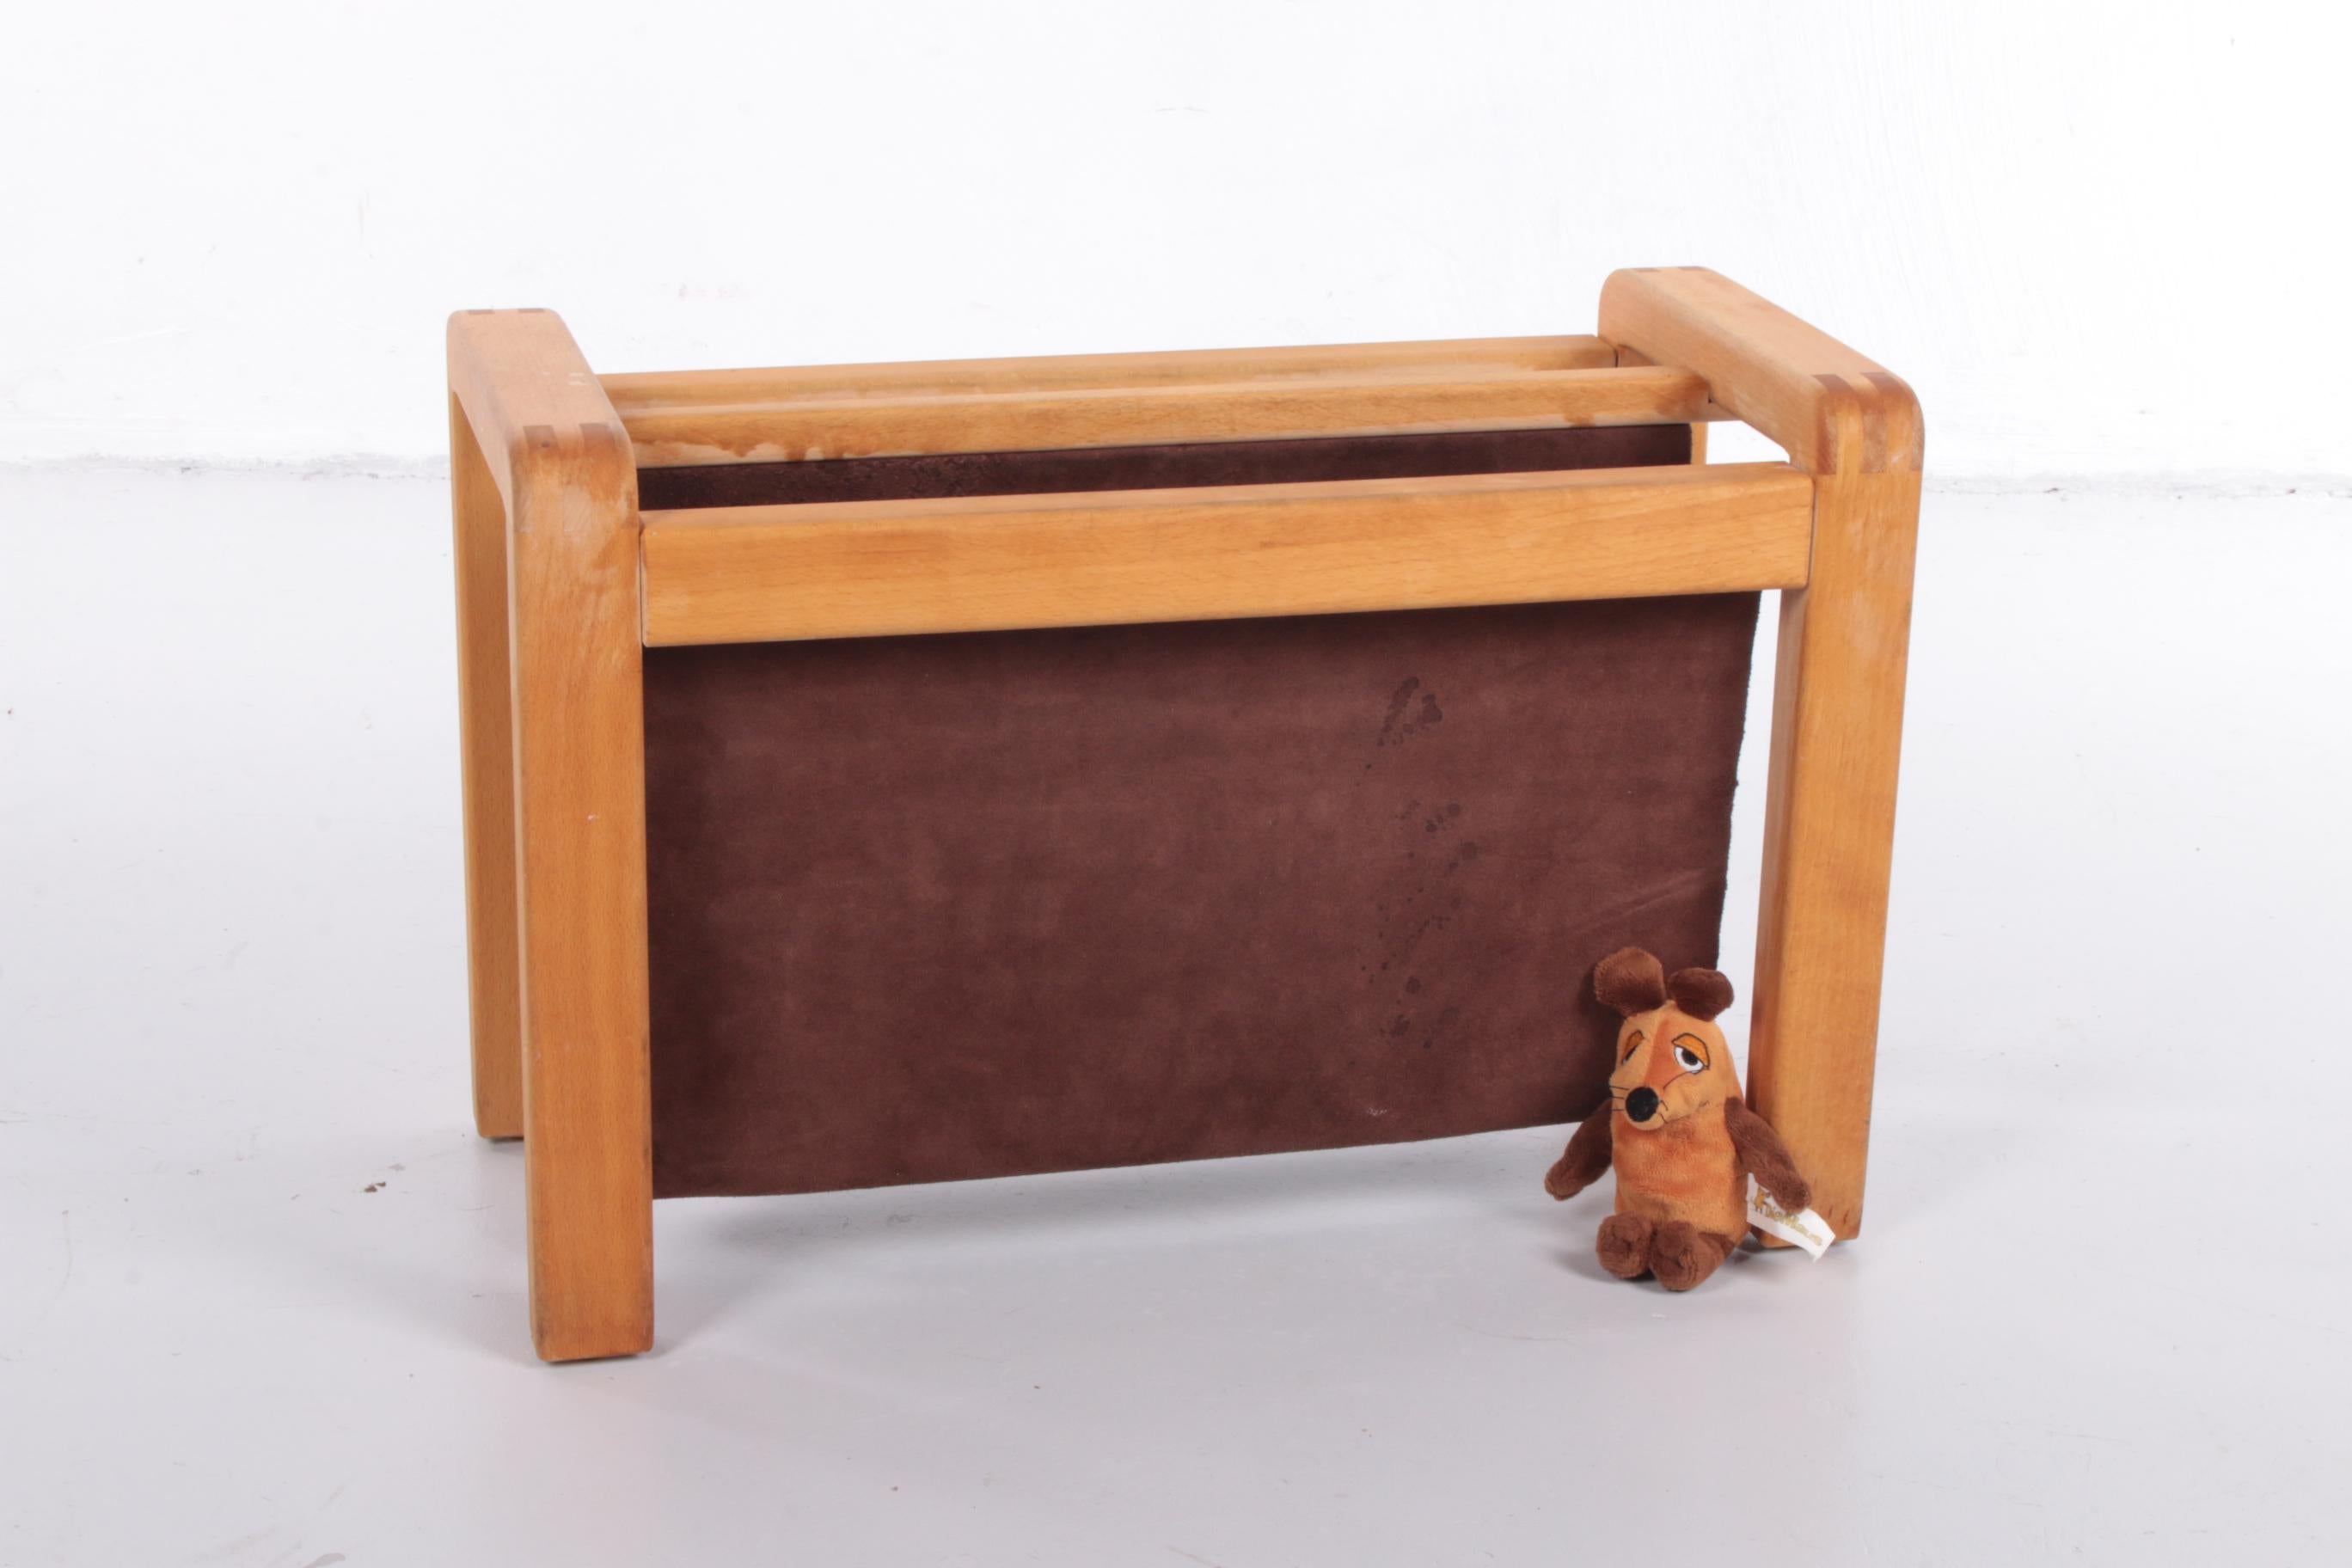 Vintage Danish magazine rack in oak from Salling Stolefabrik - 1960s

A Danish magazine rack produced in the 1960s by Salling Stolefabrik.

The warehouse rack is made of solid oak and suede.

The newspaper rack is in very good condition.
Item